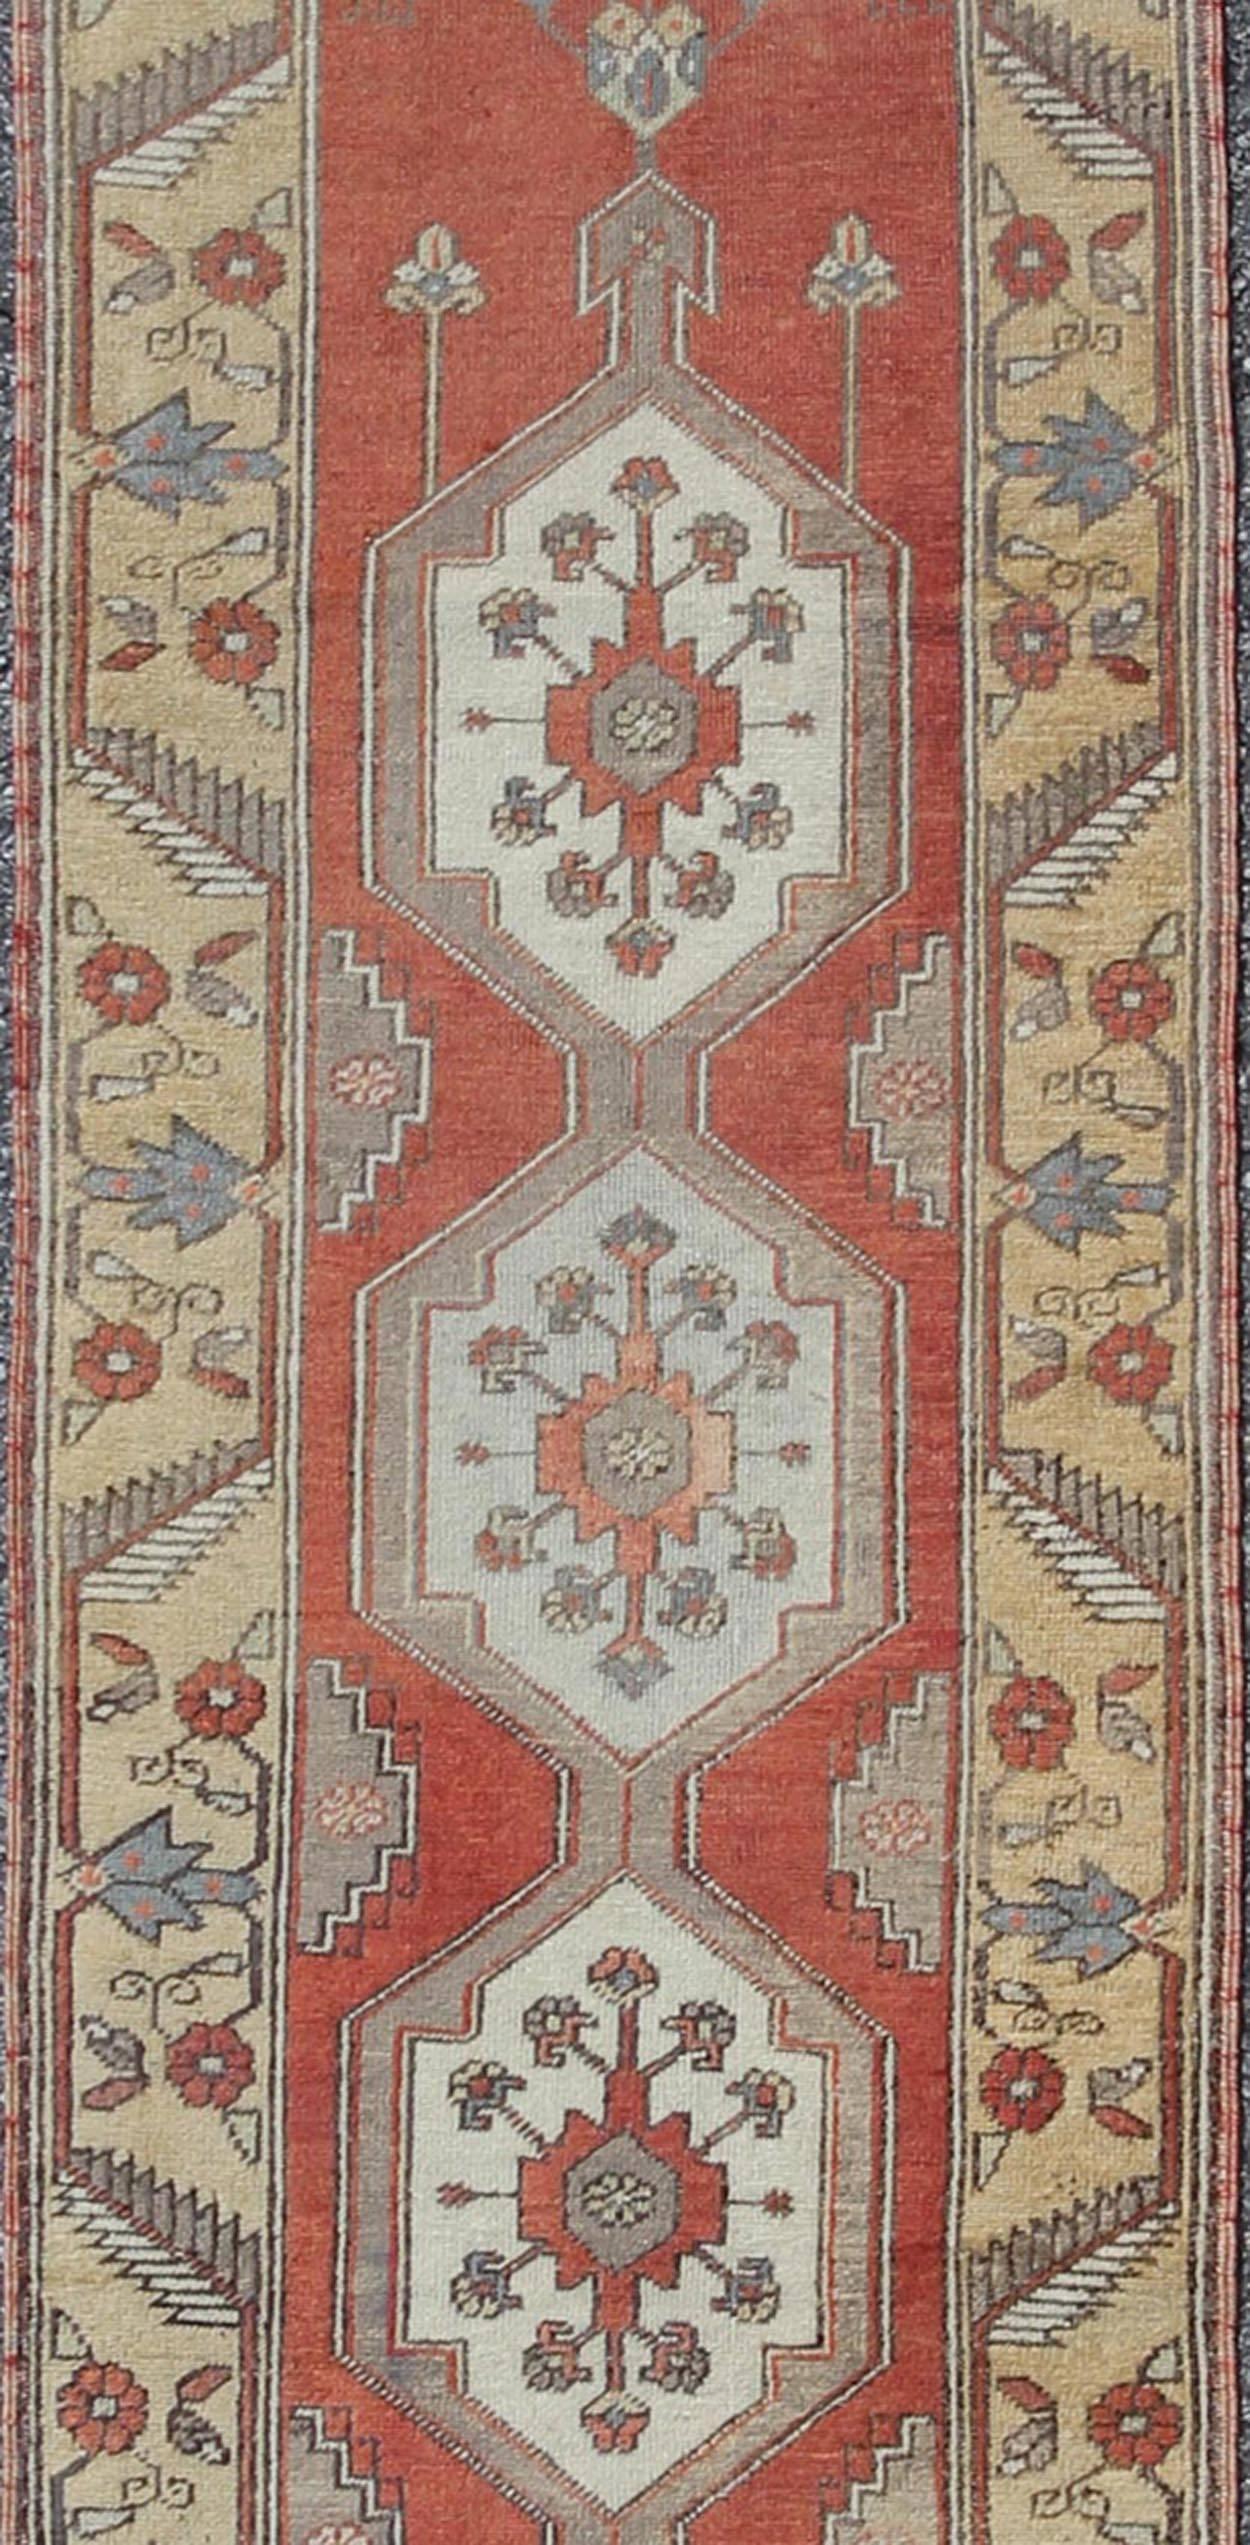 Hand-Knotted Sub-Geometric Tribal Vintage Oushak Runner from Early 20th Century Turkey For Sale